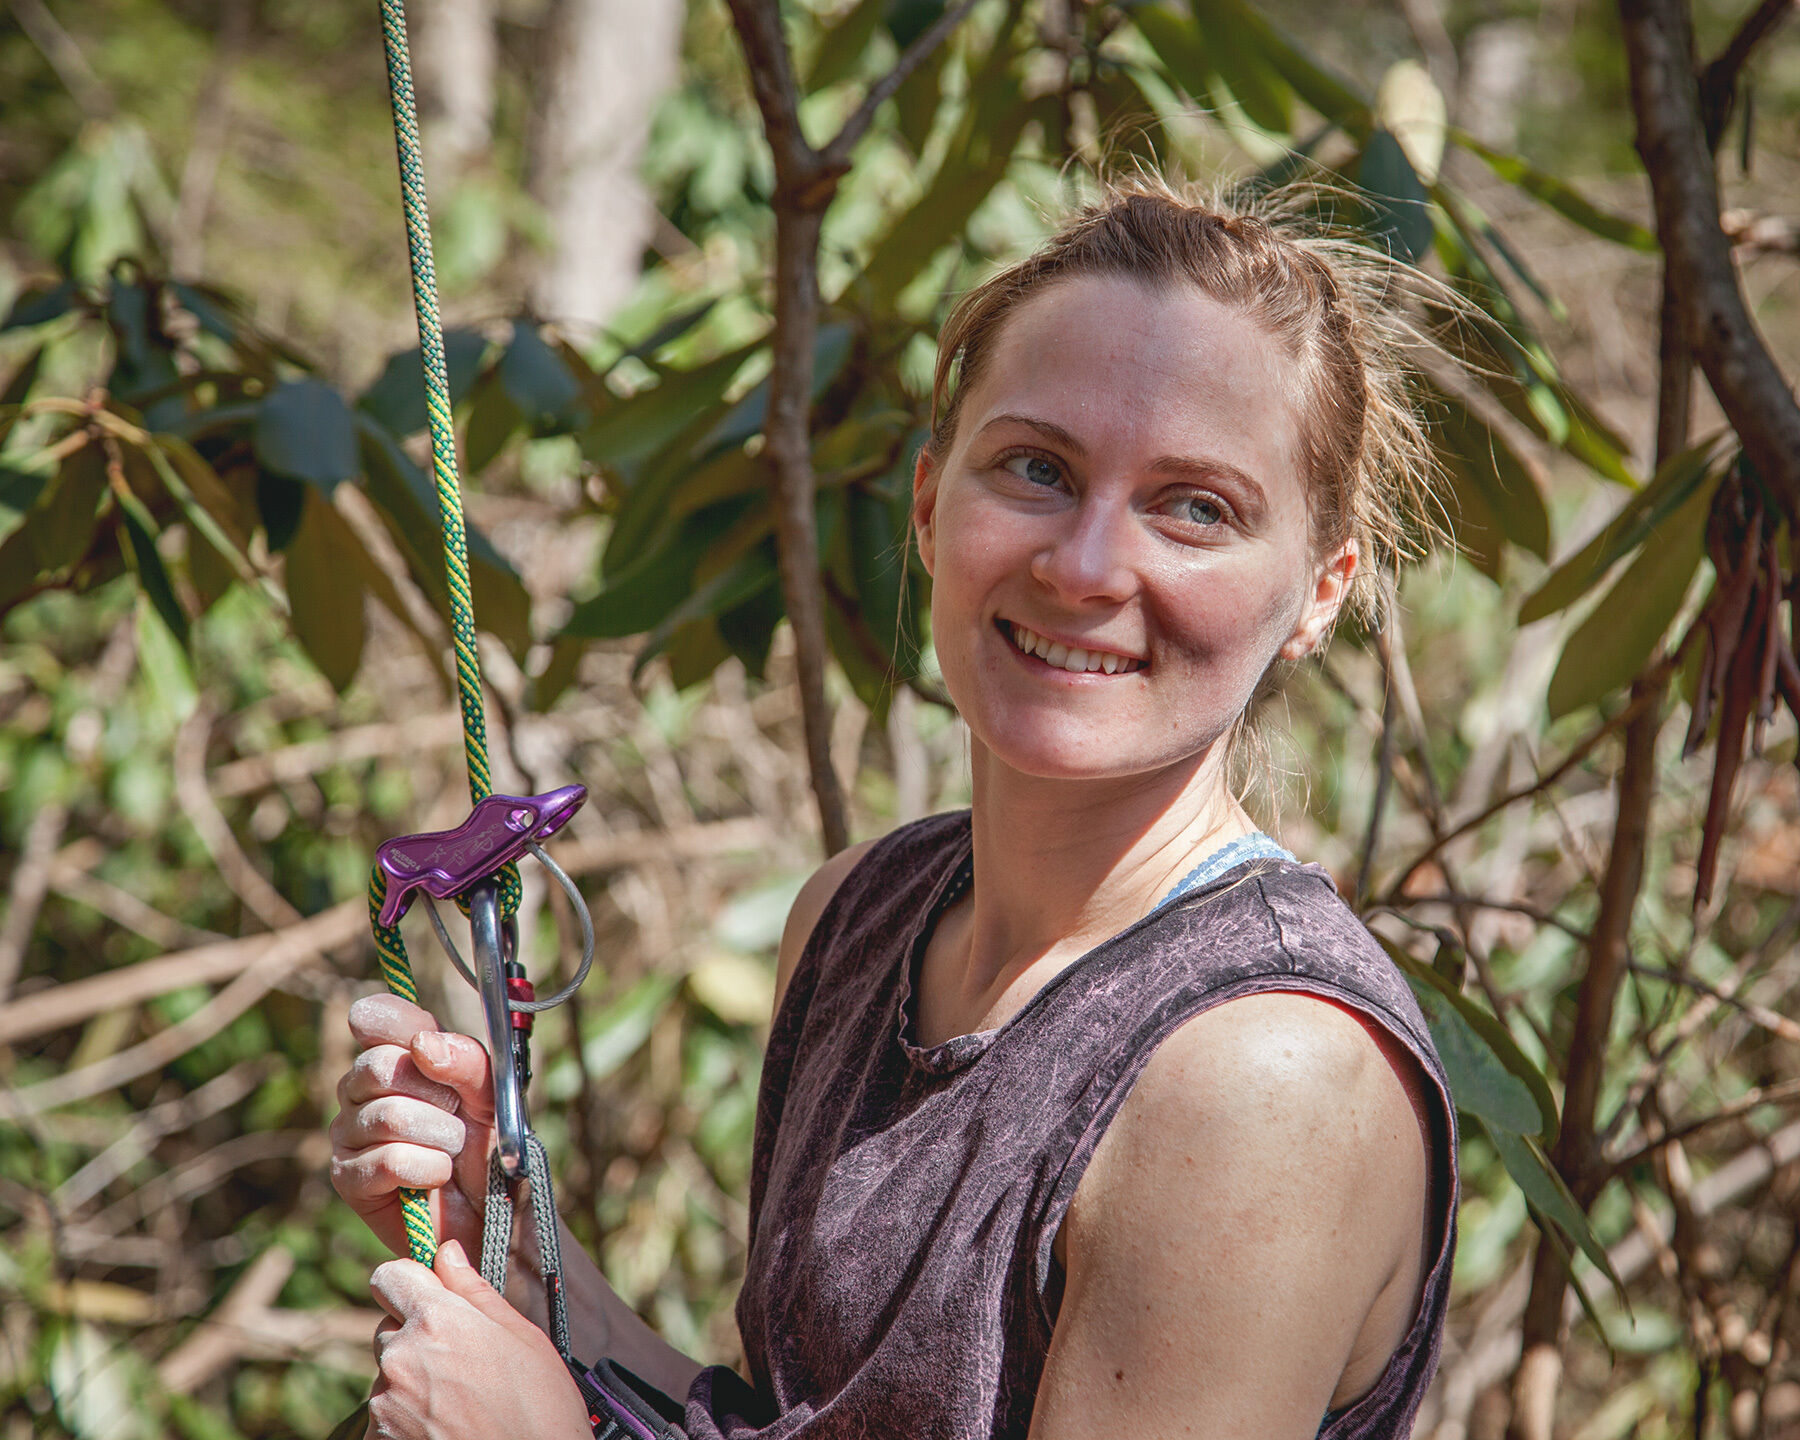 Landscape-oriented color photograph. A tight semi-profile shot of a woman holding onto a green climbing rope in a purple belay device smiles and looks off frame to the right. She has blond hair pulled up in a ponytail, fair skin, and blue eyes, and is wearing a gray tank top. The image is cropped at her torso, and her hands are covered in chalk. The sun is bright and casting half of her face and torso in shadow. All around her in the background are the leaves and branches of trees and bushes, slightly out of focus.